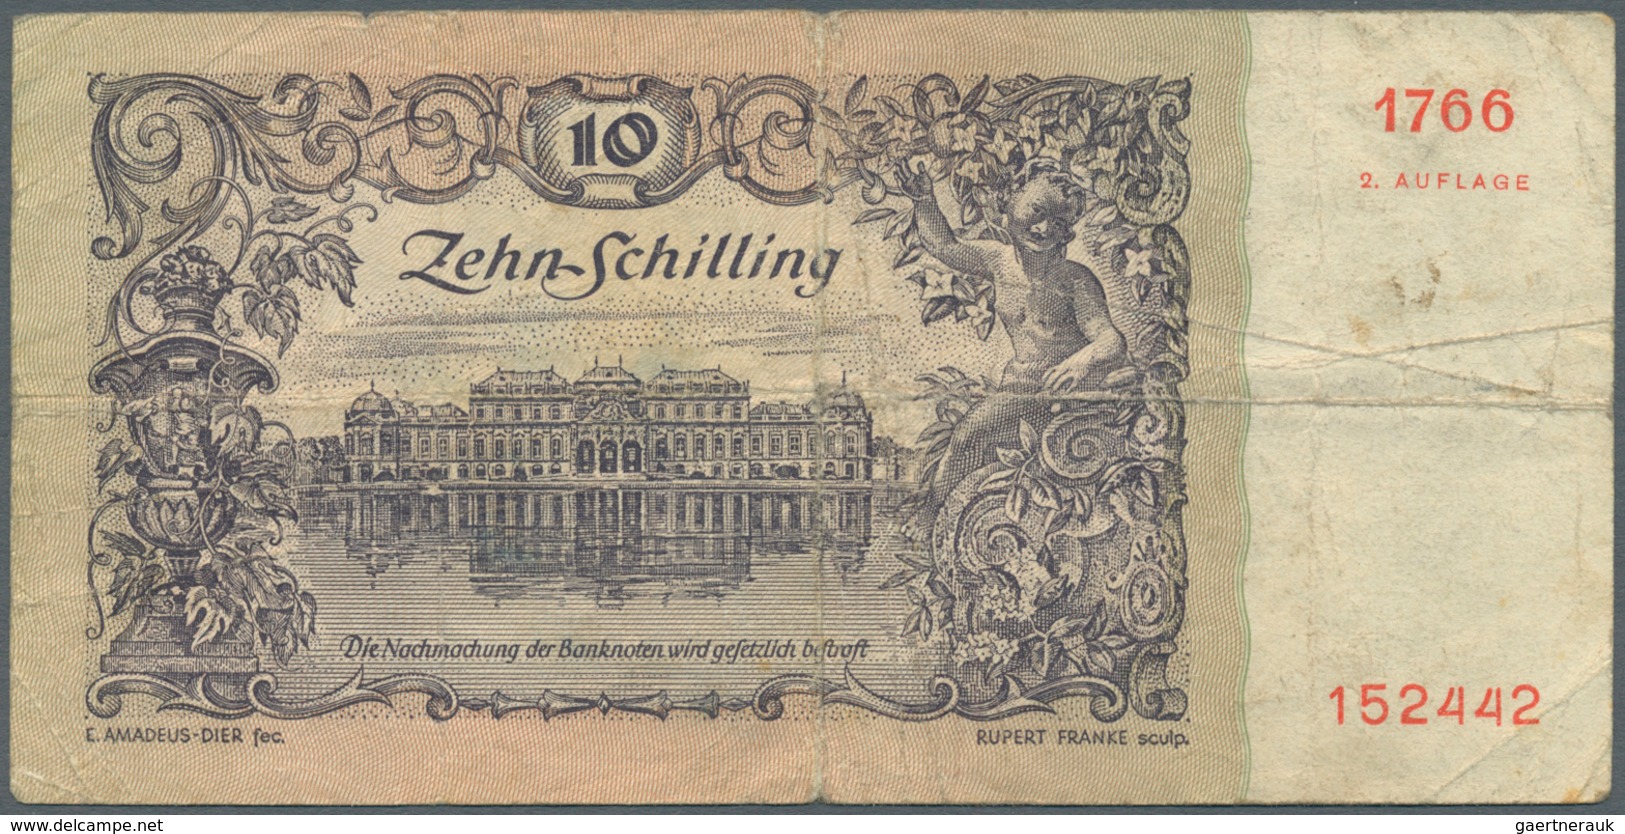 02935 Alle Welt: Small collection with 20 Banknotes comprising for example Austria 100.000 Kronen 1922, Au